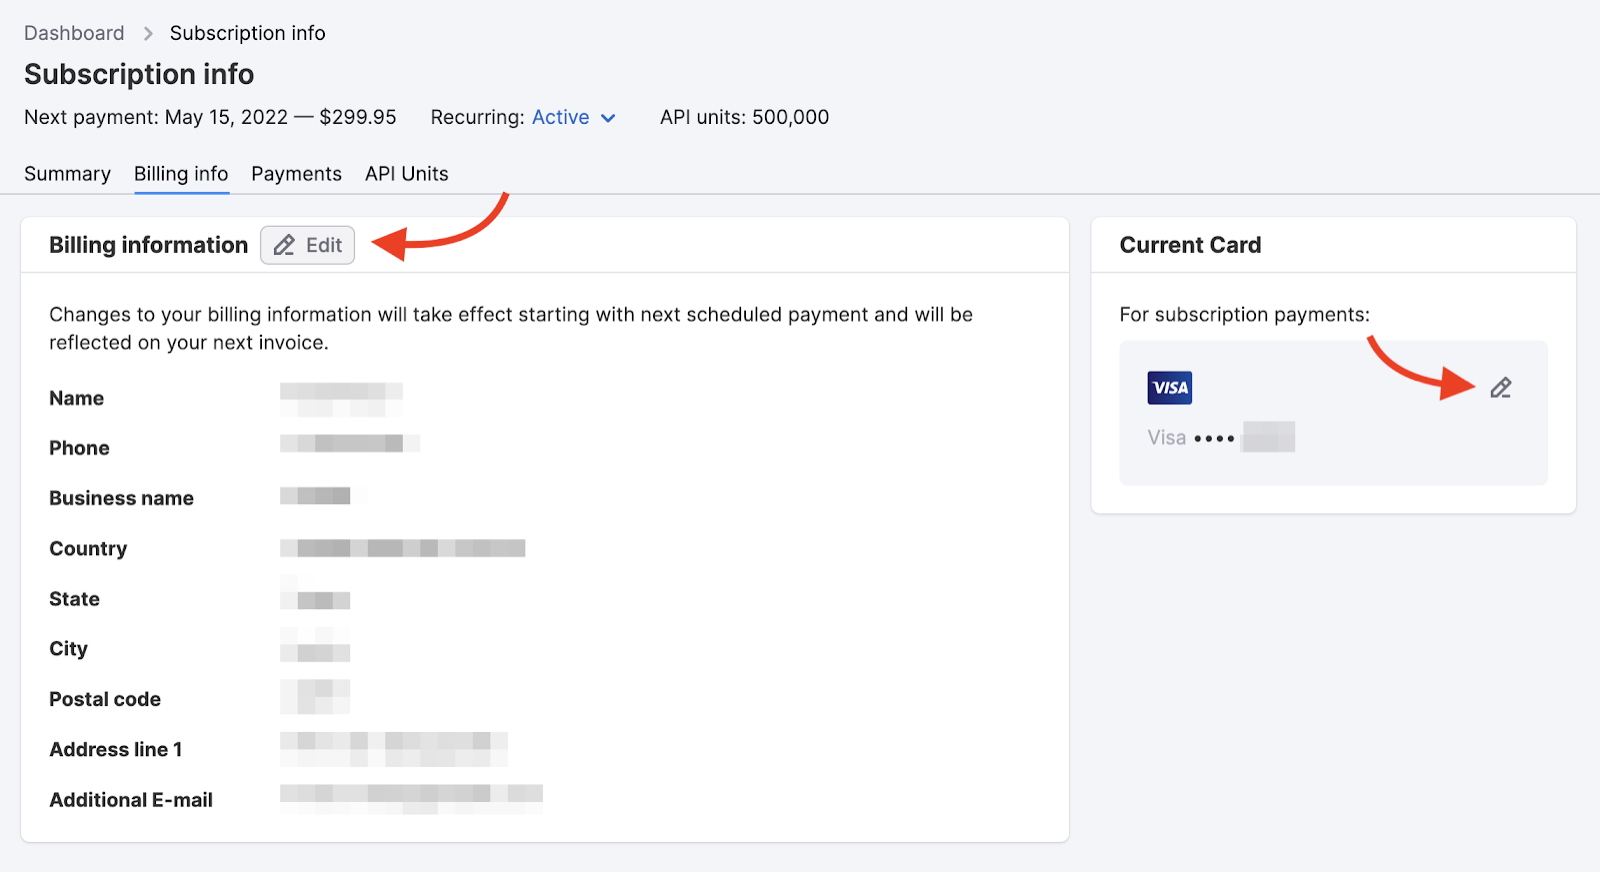 In this screenshot from Billing info, two red arrows are pointing to the buttons to edit billing information and current credit card details. 